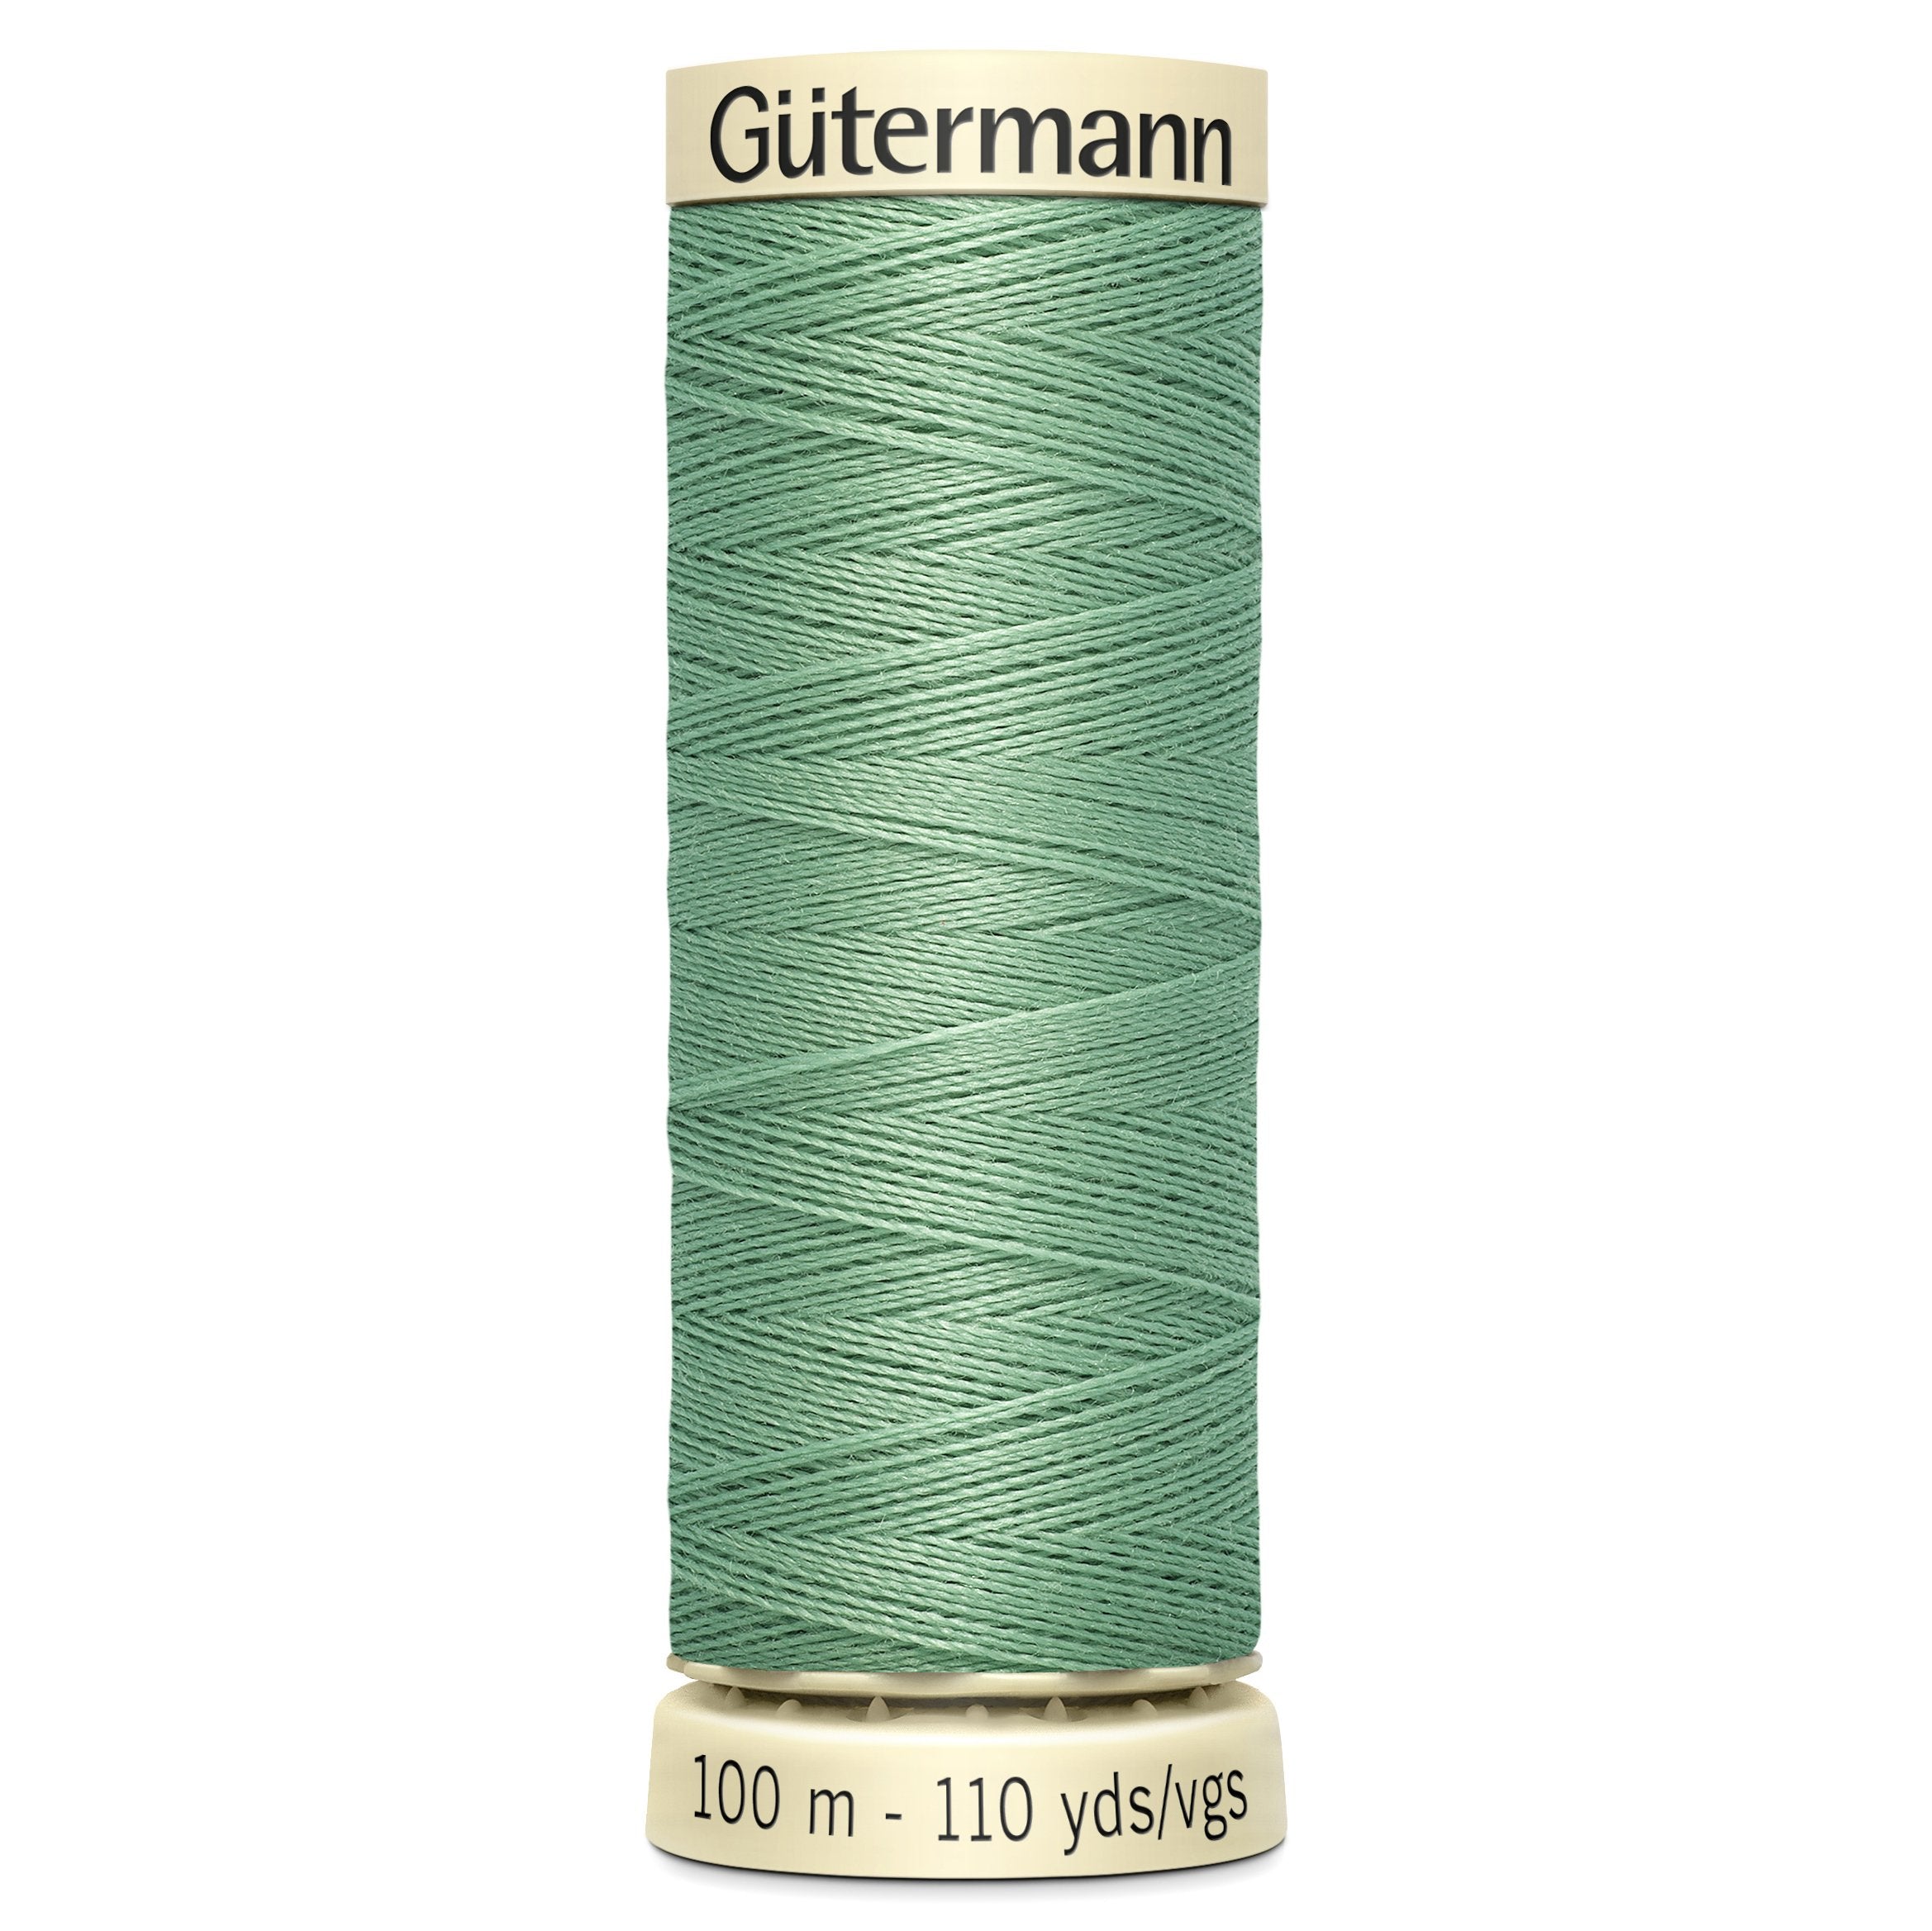 Gutermann Sew All Thread colour 913 Sea Green from Jaycotts Sewing Supplies